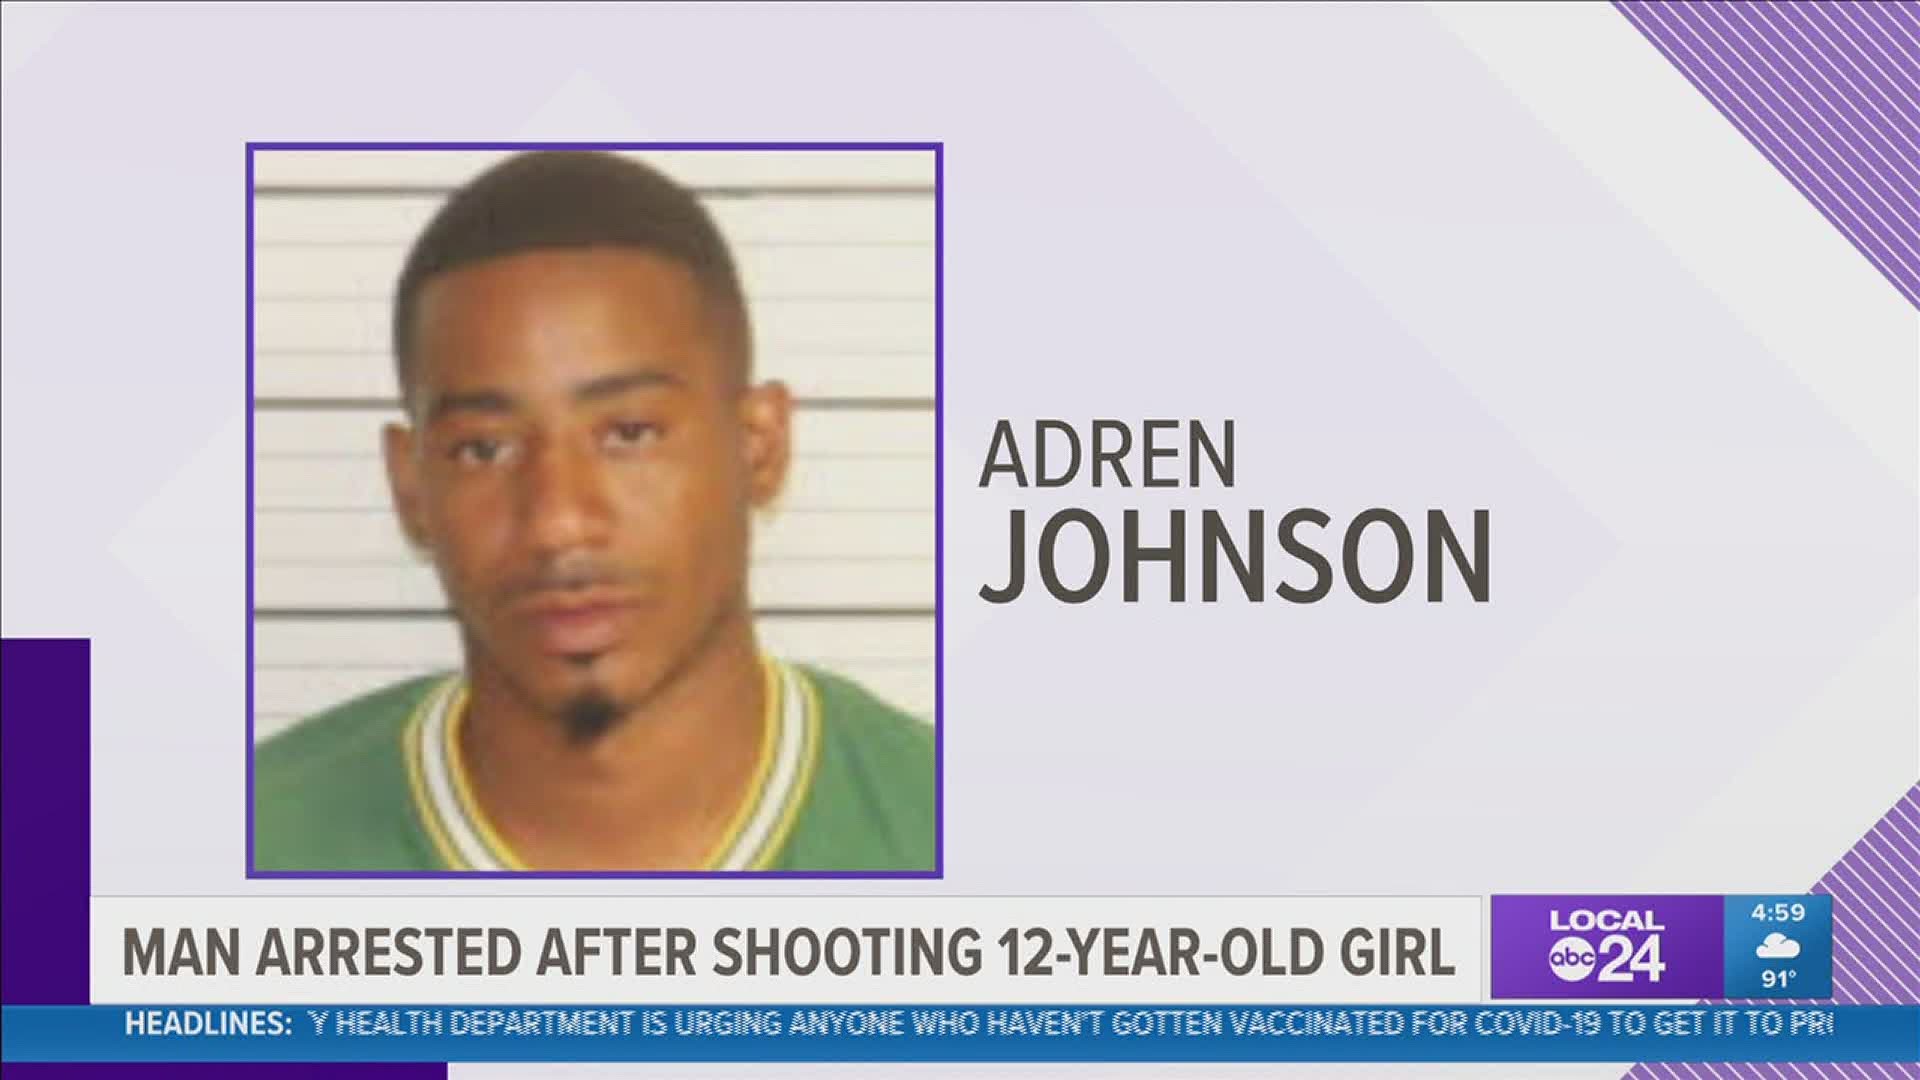 Adren Johnson is charged with attempted murder after firing shots that injured his girlfriend's niece